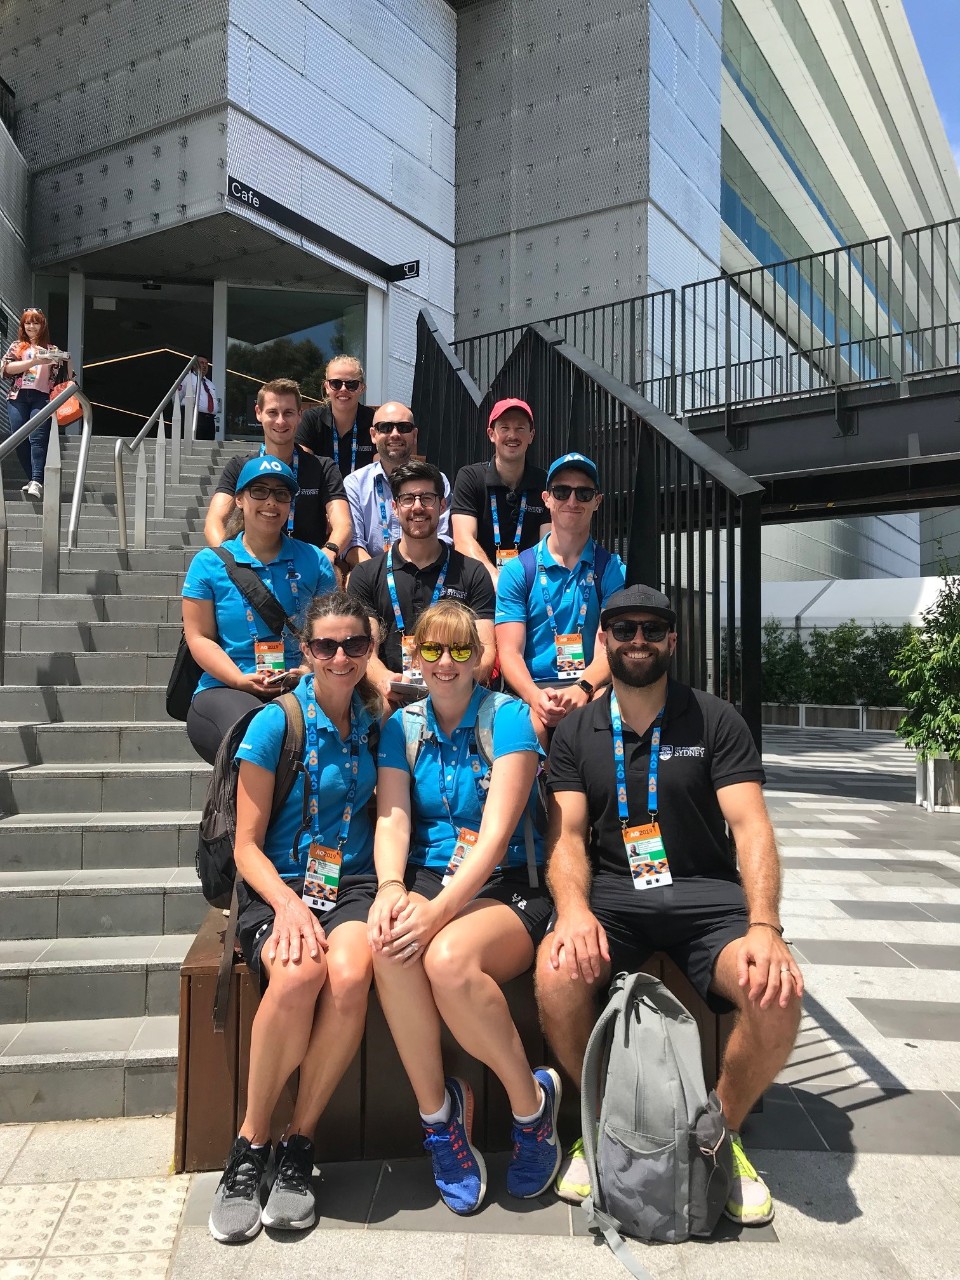 Staff from the Thermal Ergonomics Lab at the 2019 Australian Open